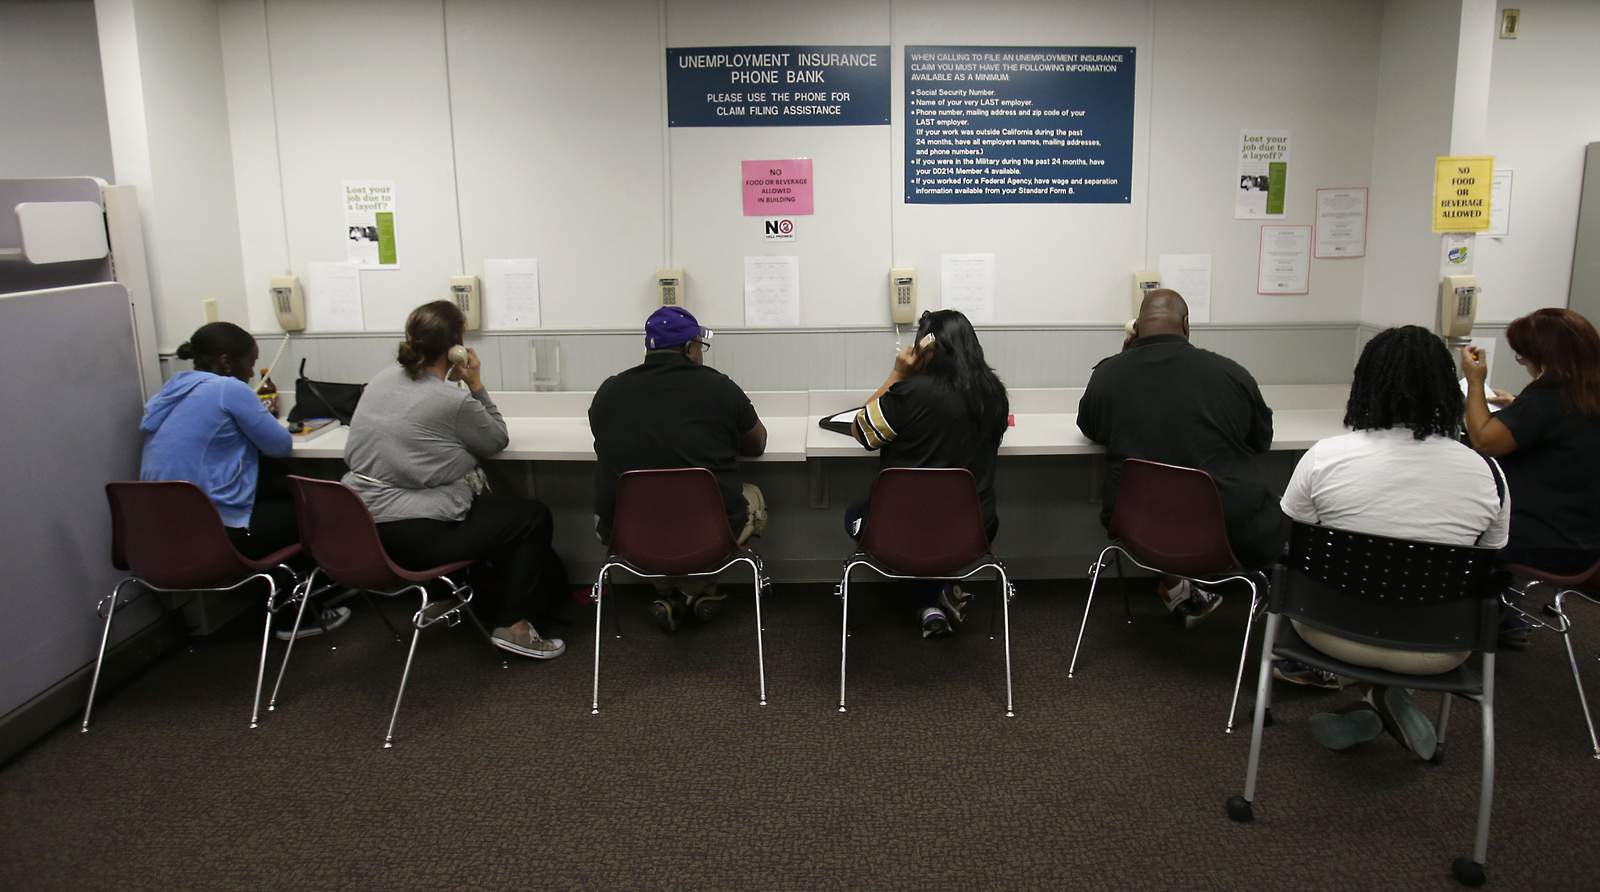 Fraud concerns over California's unemployment benefits